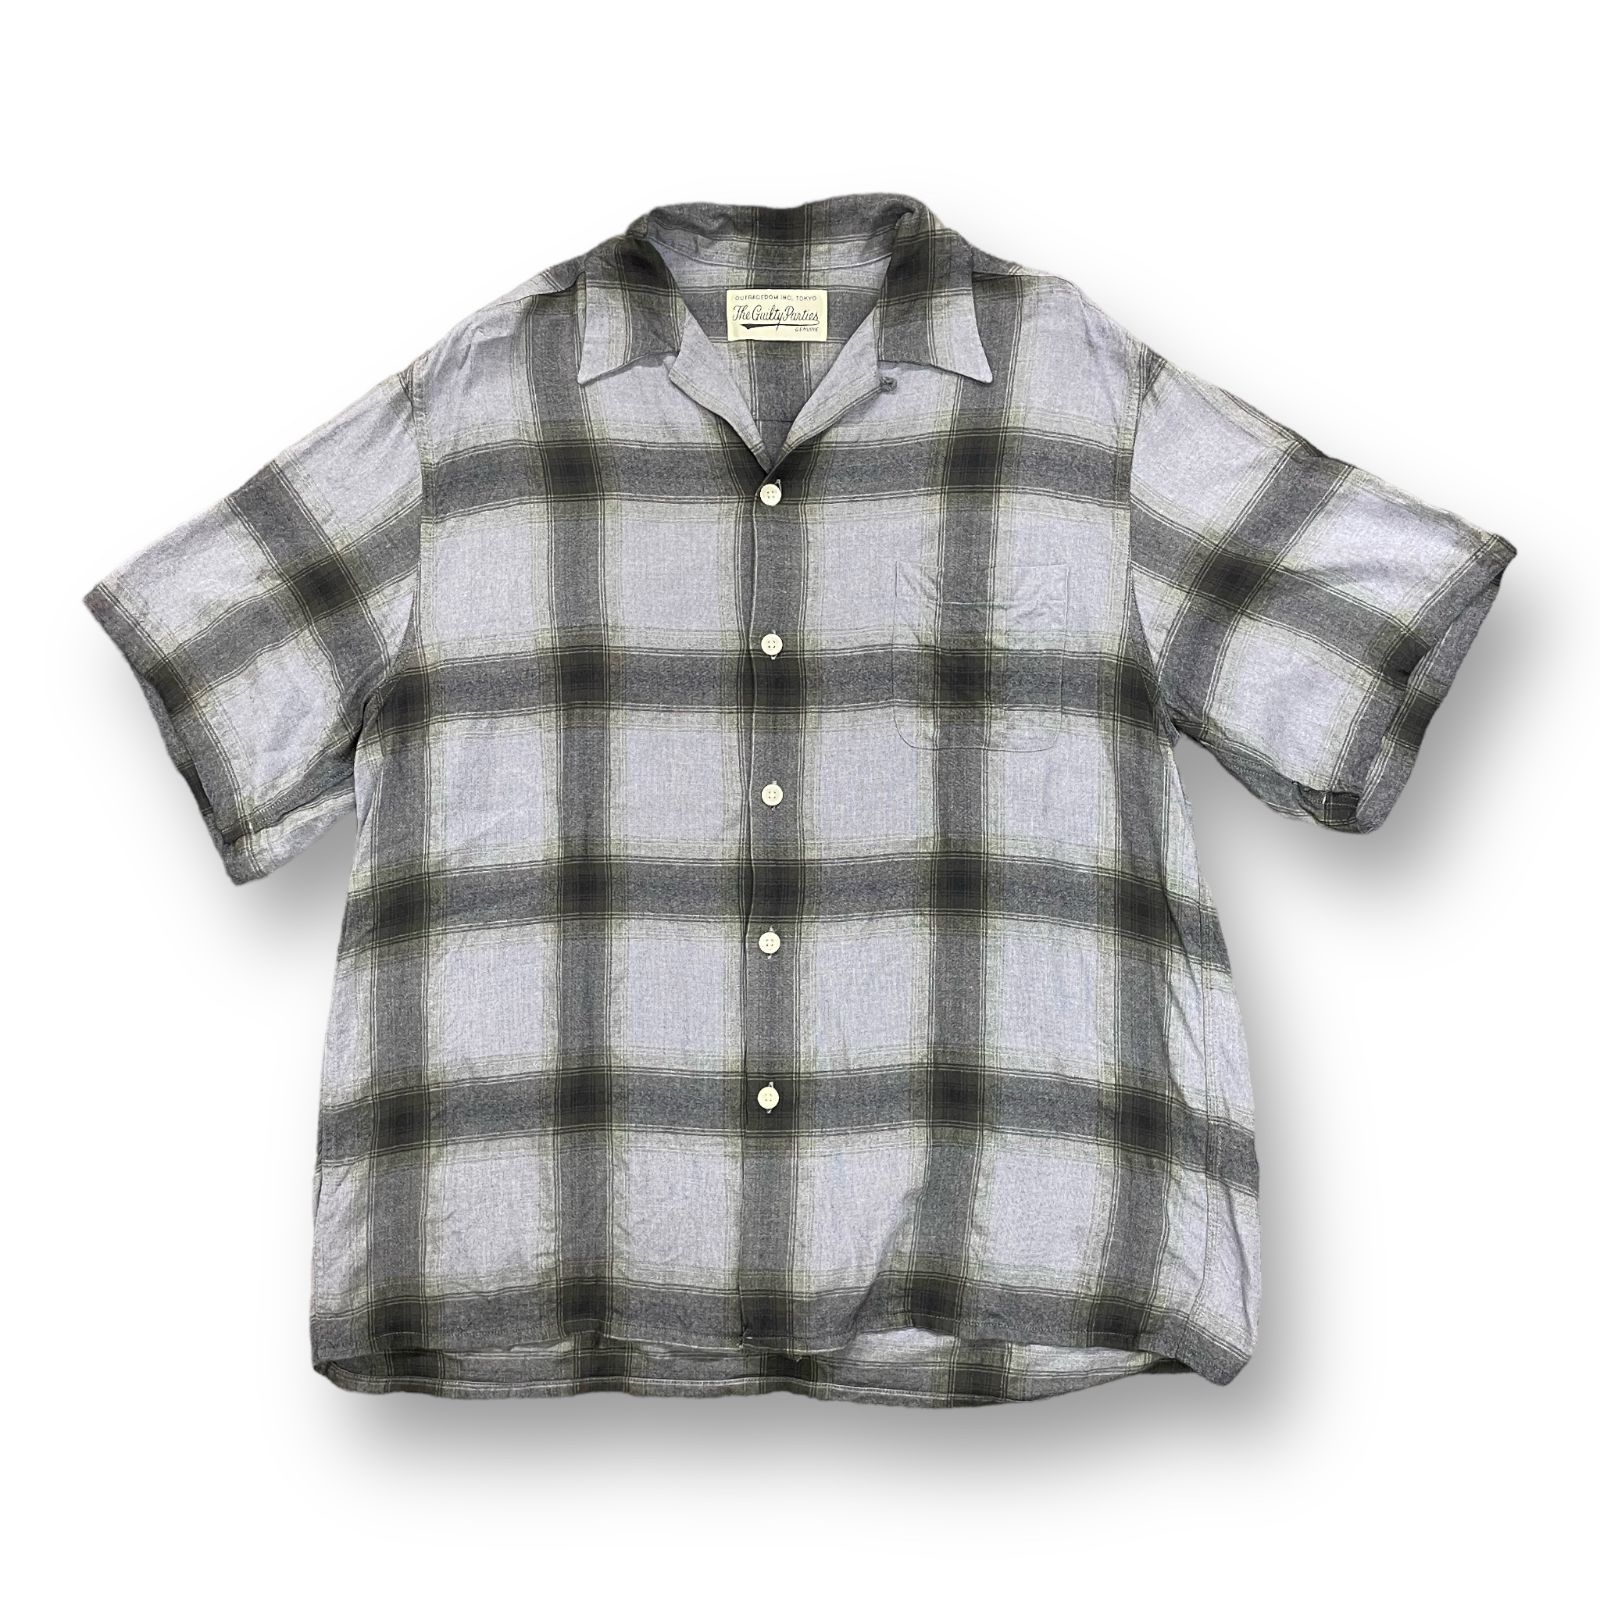 WACKO MARIA 23SS OMBRE CHECK OPEN COLLAR SHIRT オンブレチェック ...